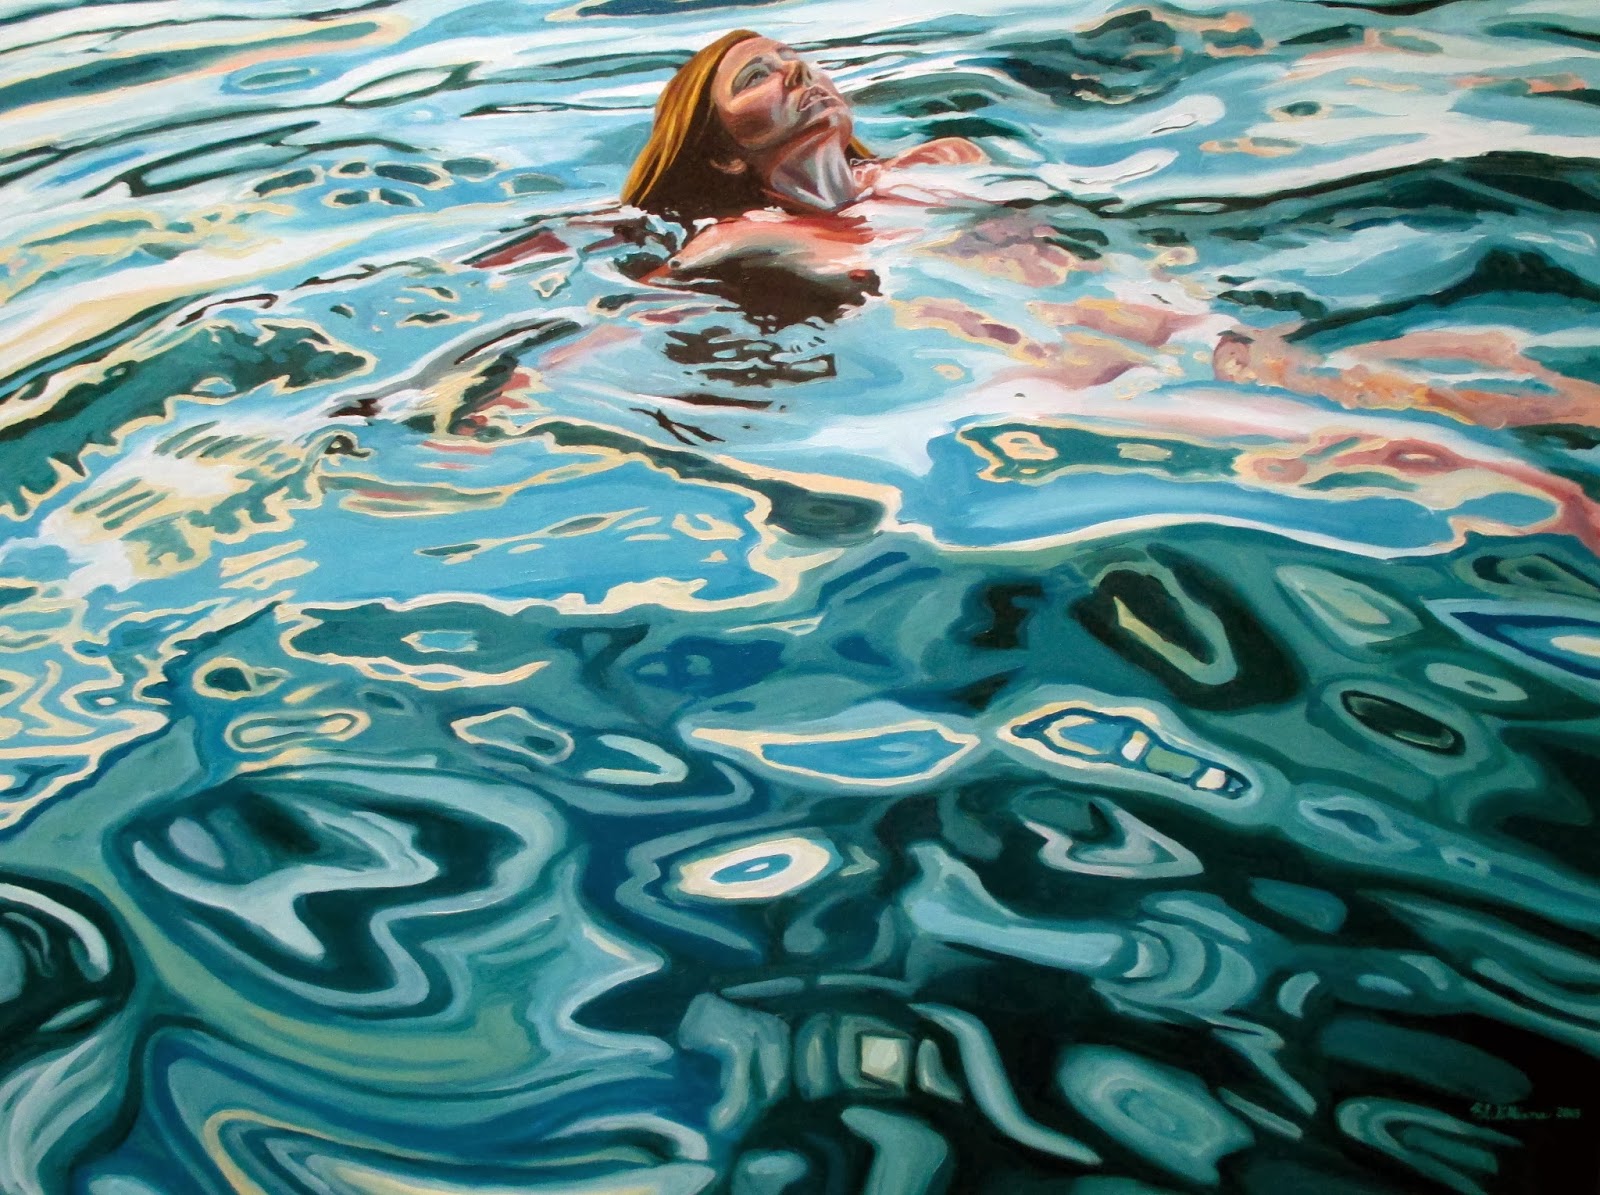 Woman in Water 2: Artists Self Portrait, 2013 (30 x 40 inches) Oil on Canva...